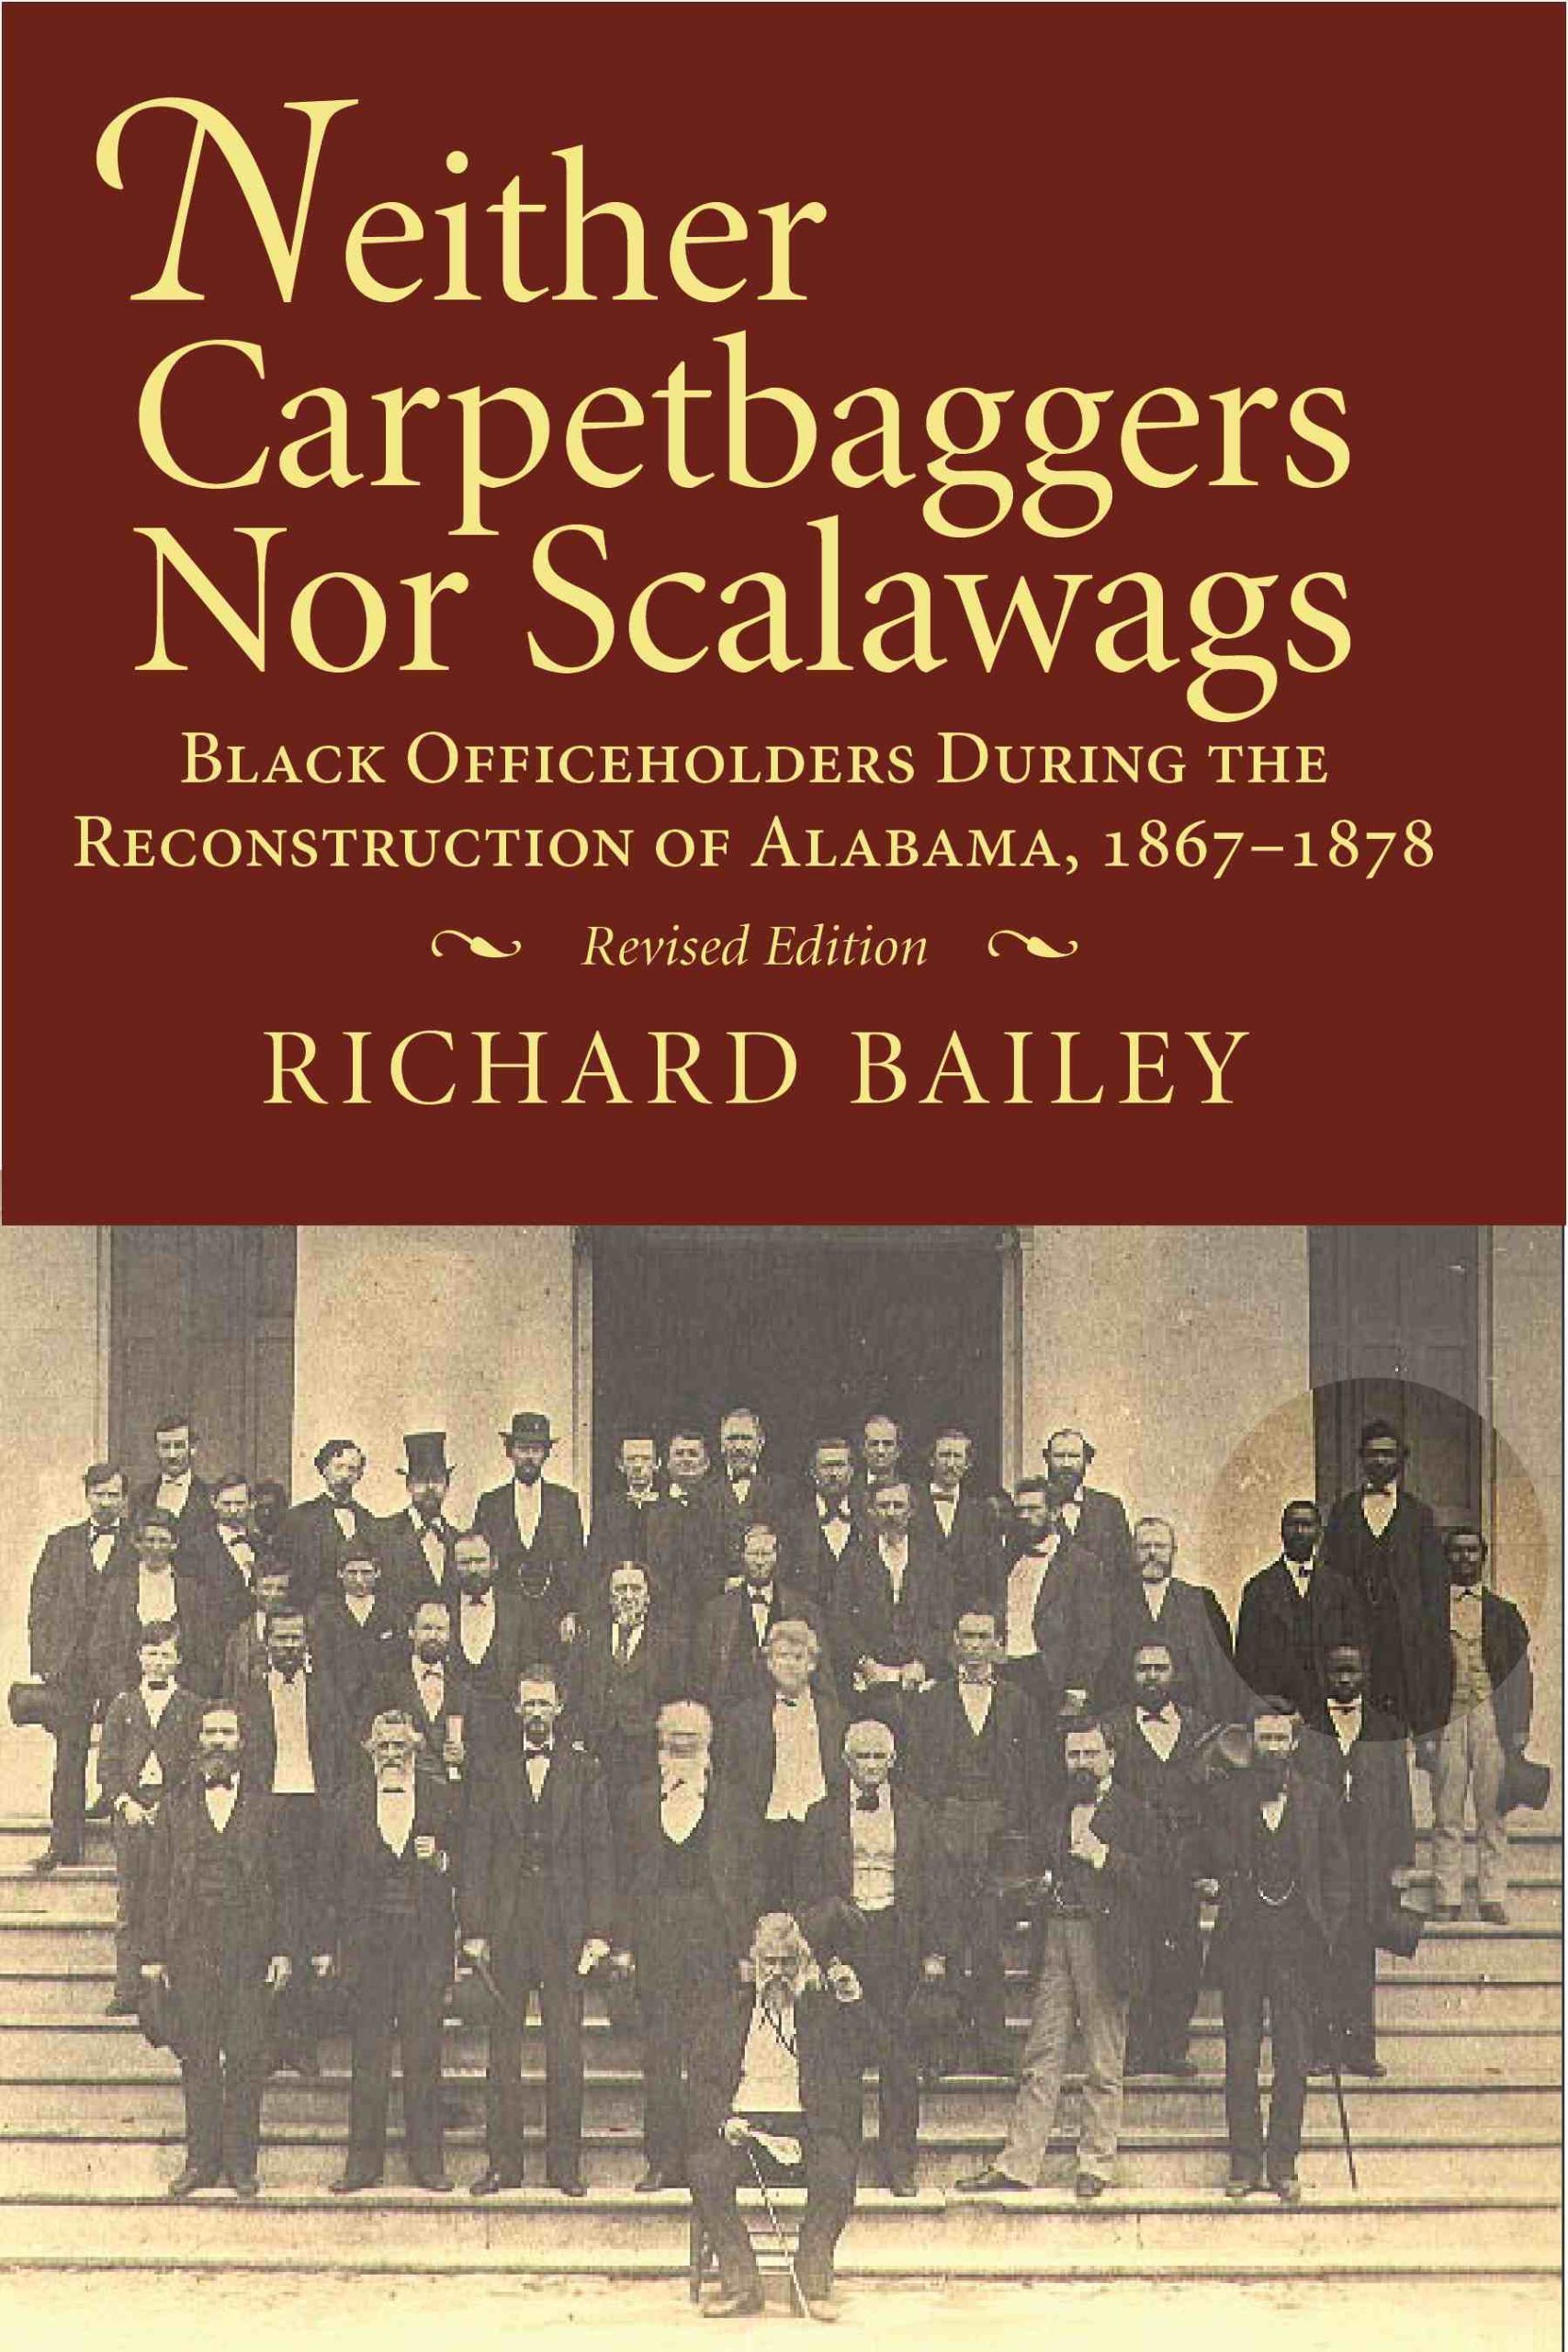 Neither Carpetbaggers Nor Scalawags: Black Officeholders During the Reconstruction of Alabama 1867-1878 by Richard Bailey